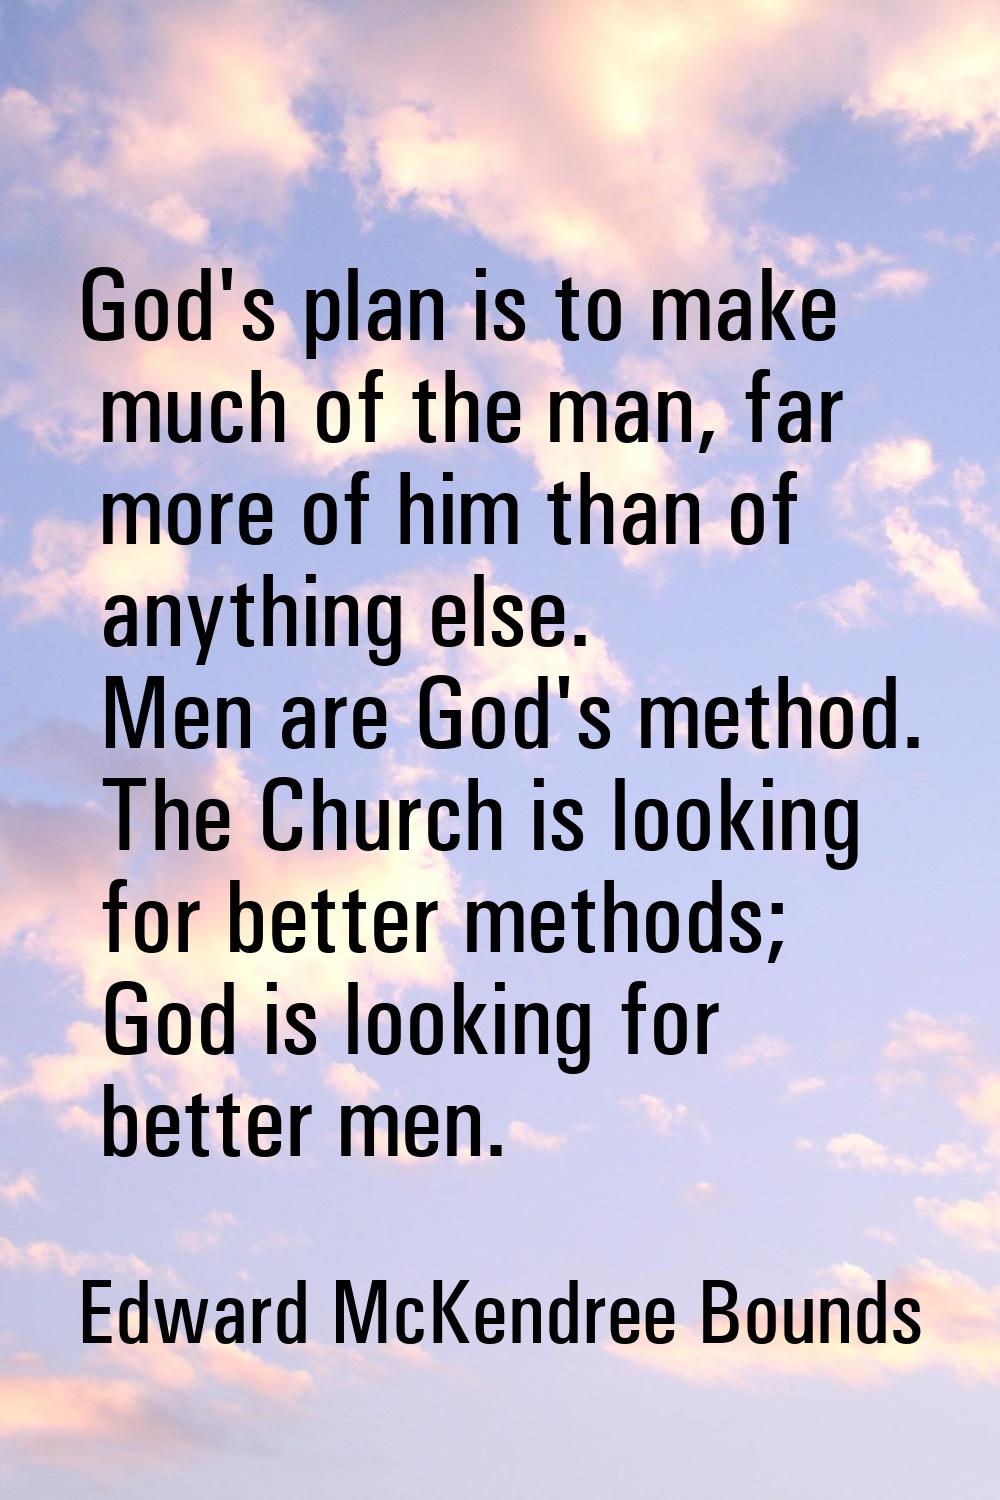 God's plan is to make much of the man, far more of him than of anything else. Men are God's method.